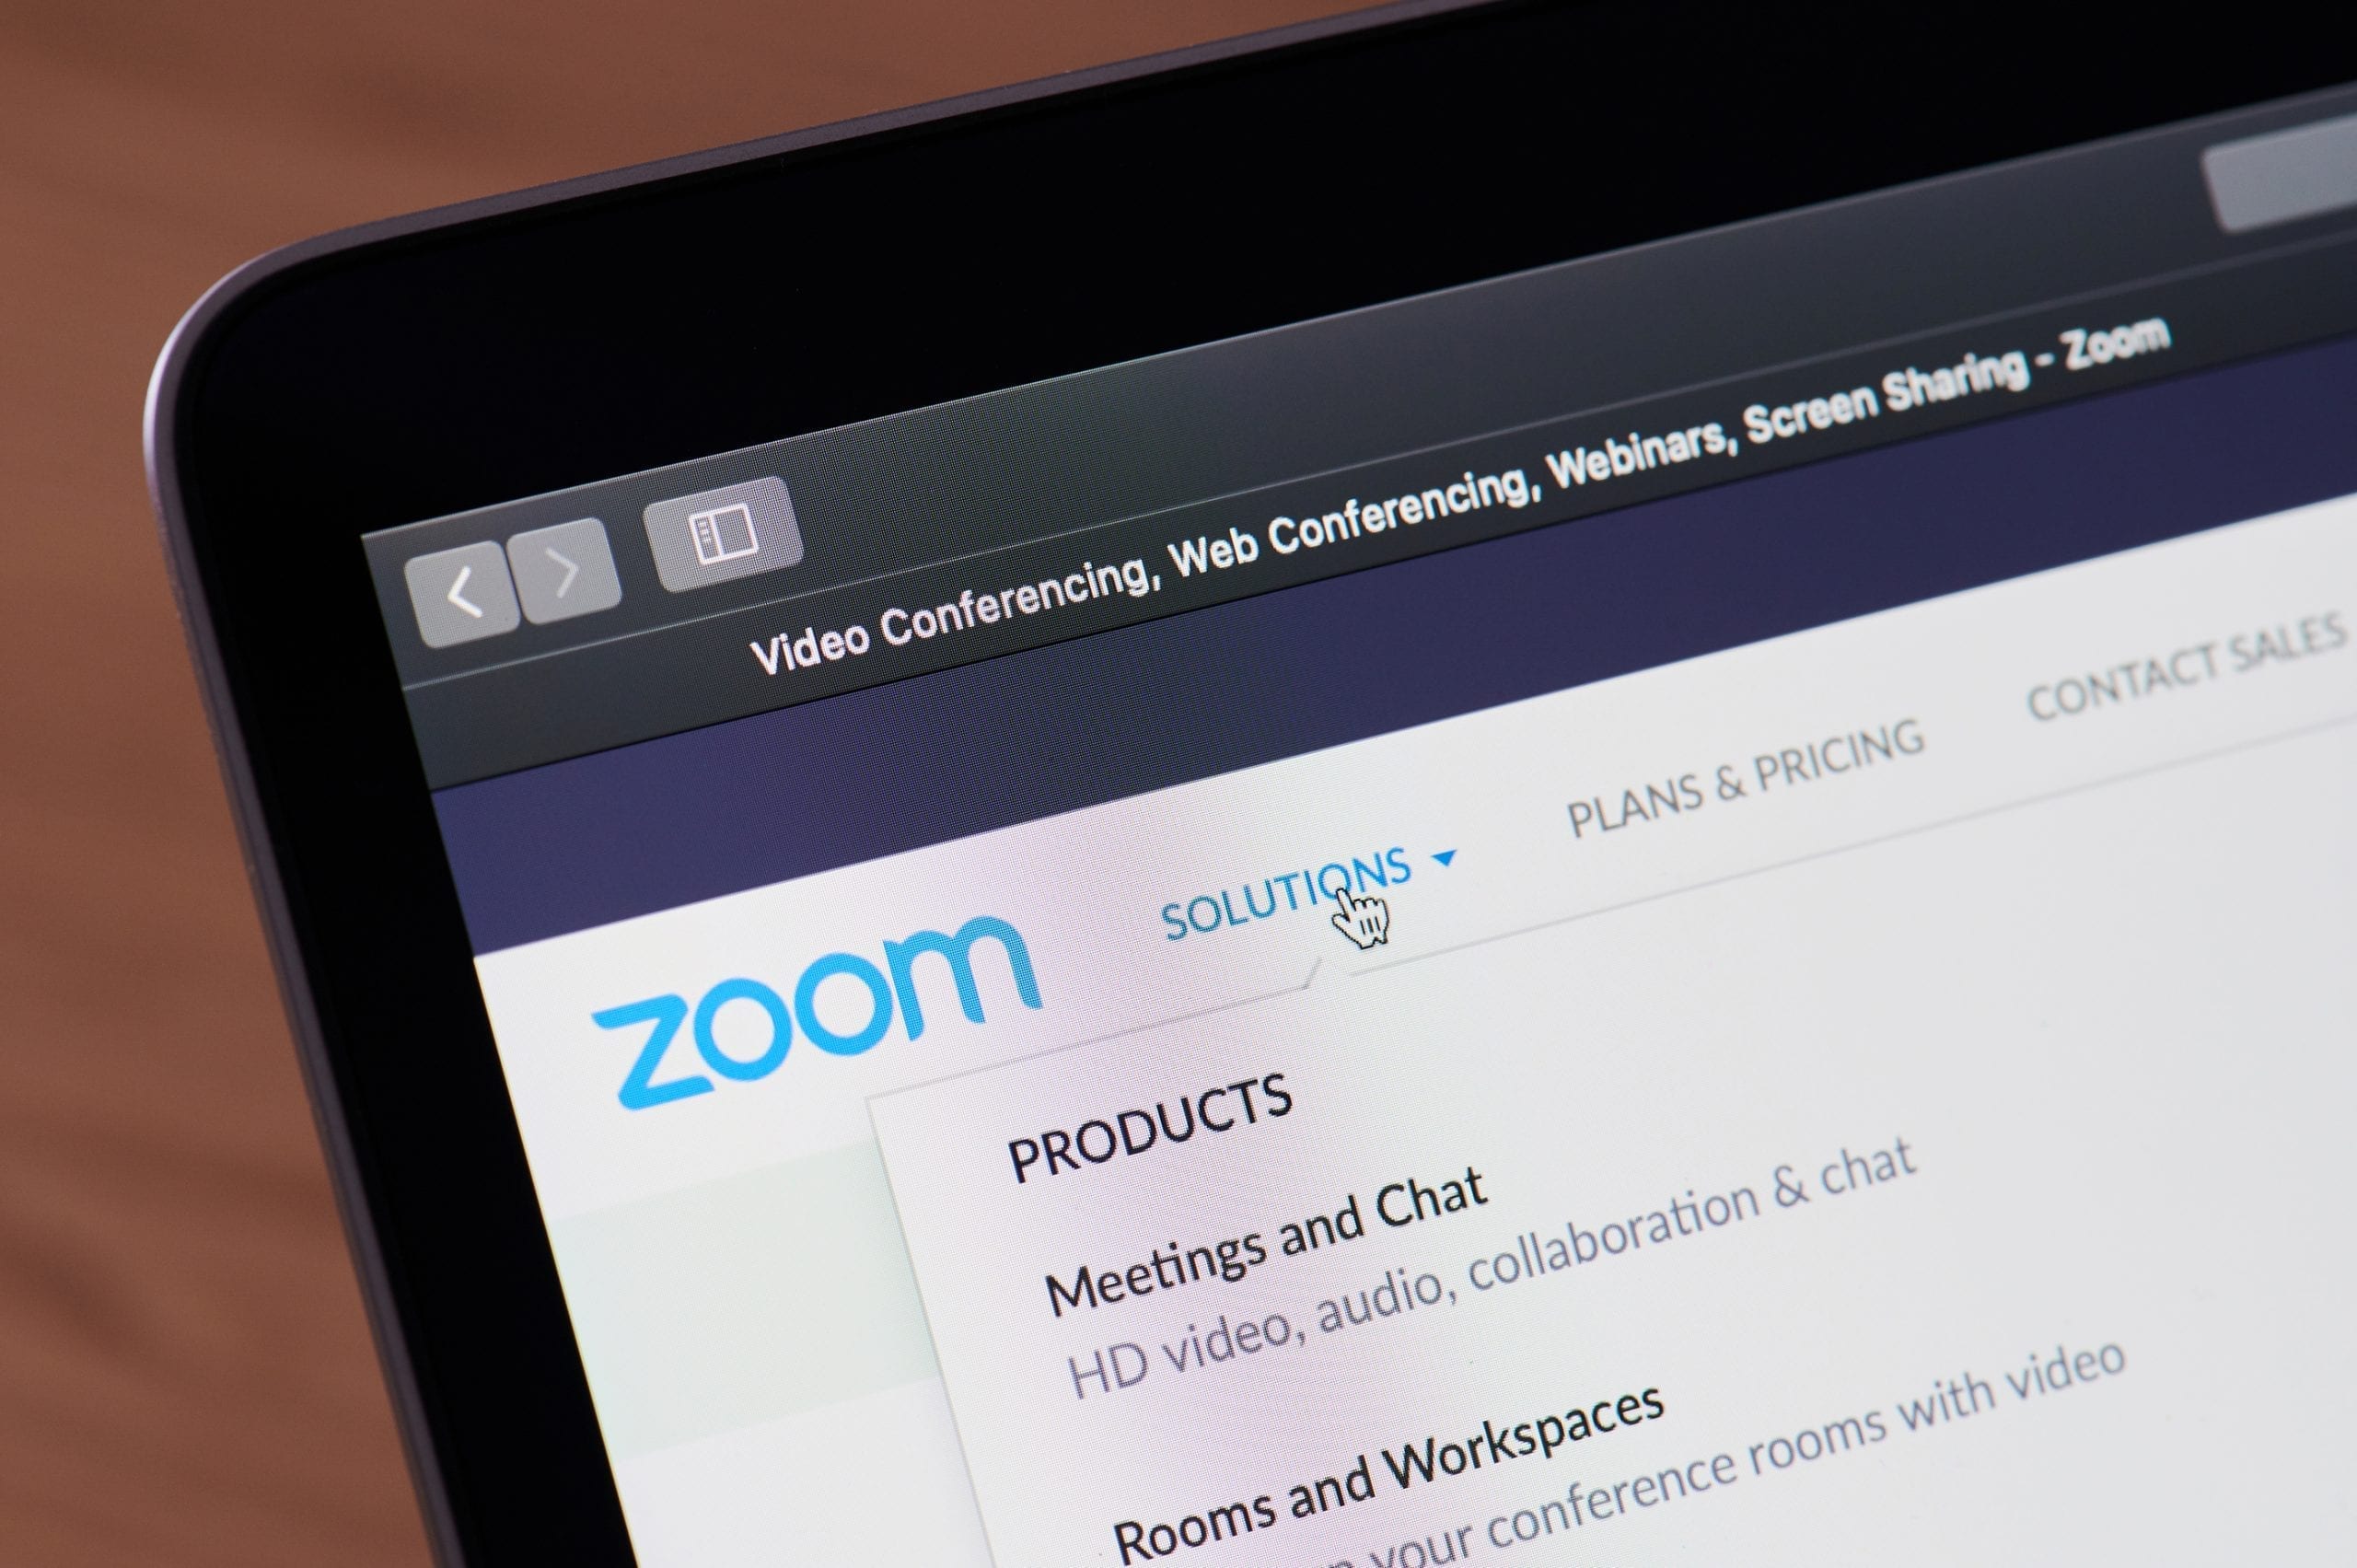 Bible Class "Zoombombing" Leads to California Class Action Lawsuit